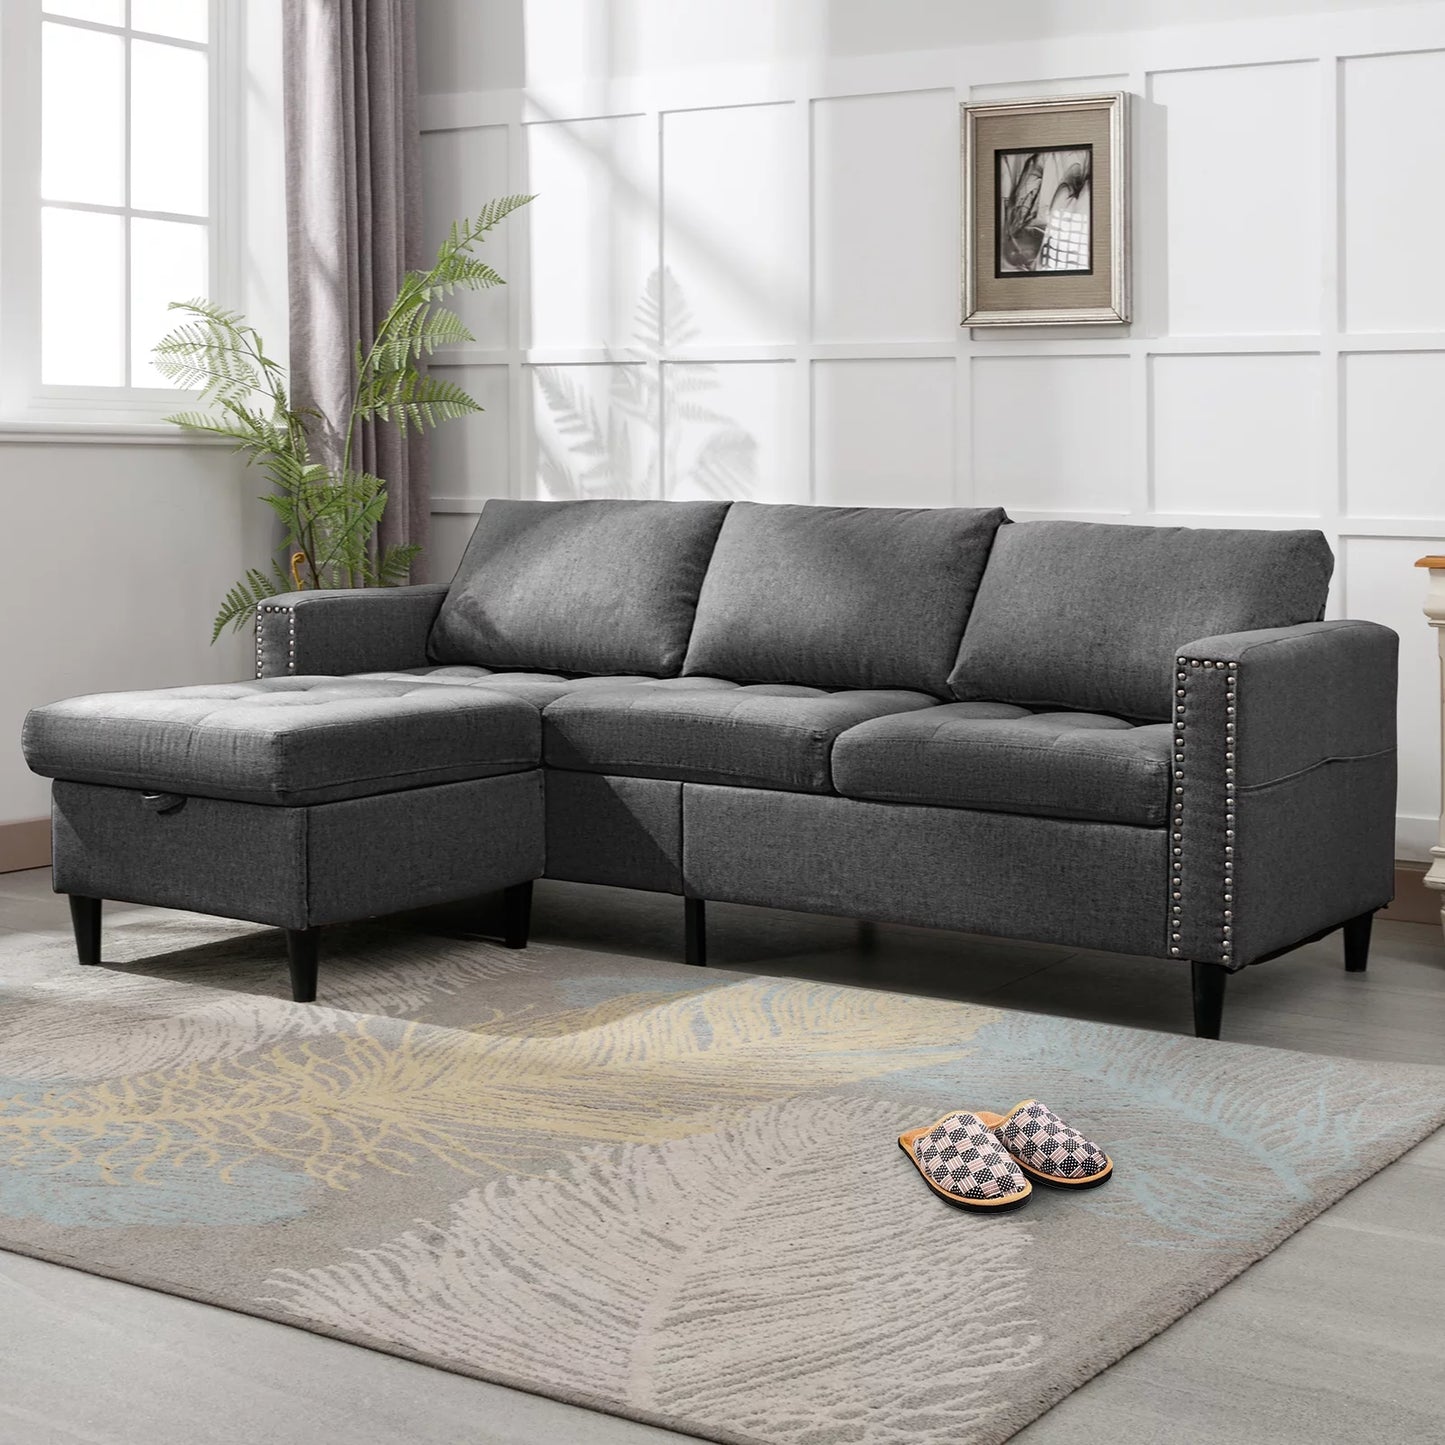 BALUS Sectional Sofa, L Shaped Modular Sectional Sofa with Flexible Storage Ottoman Chaise, Modern Sofa Couches, Living Room Furniture Set, Small Place Couch - Dark Grey